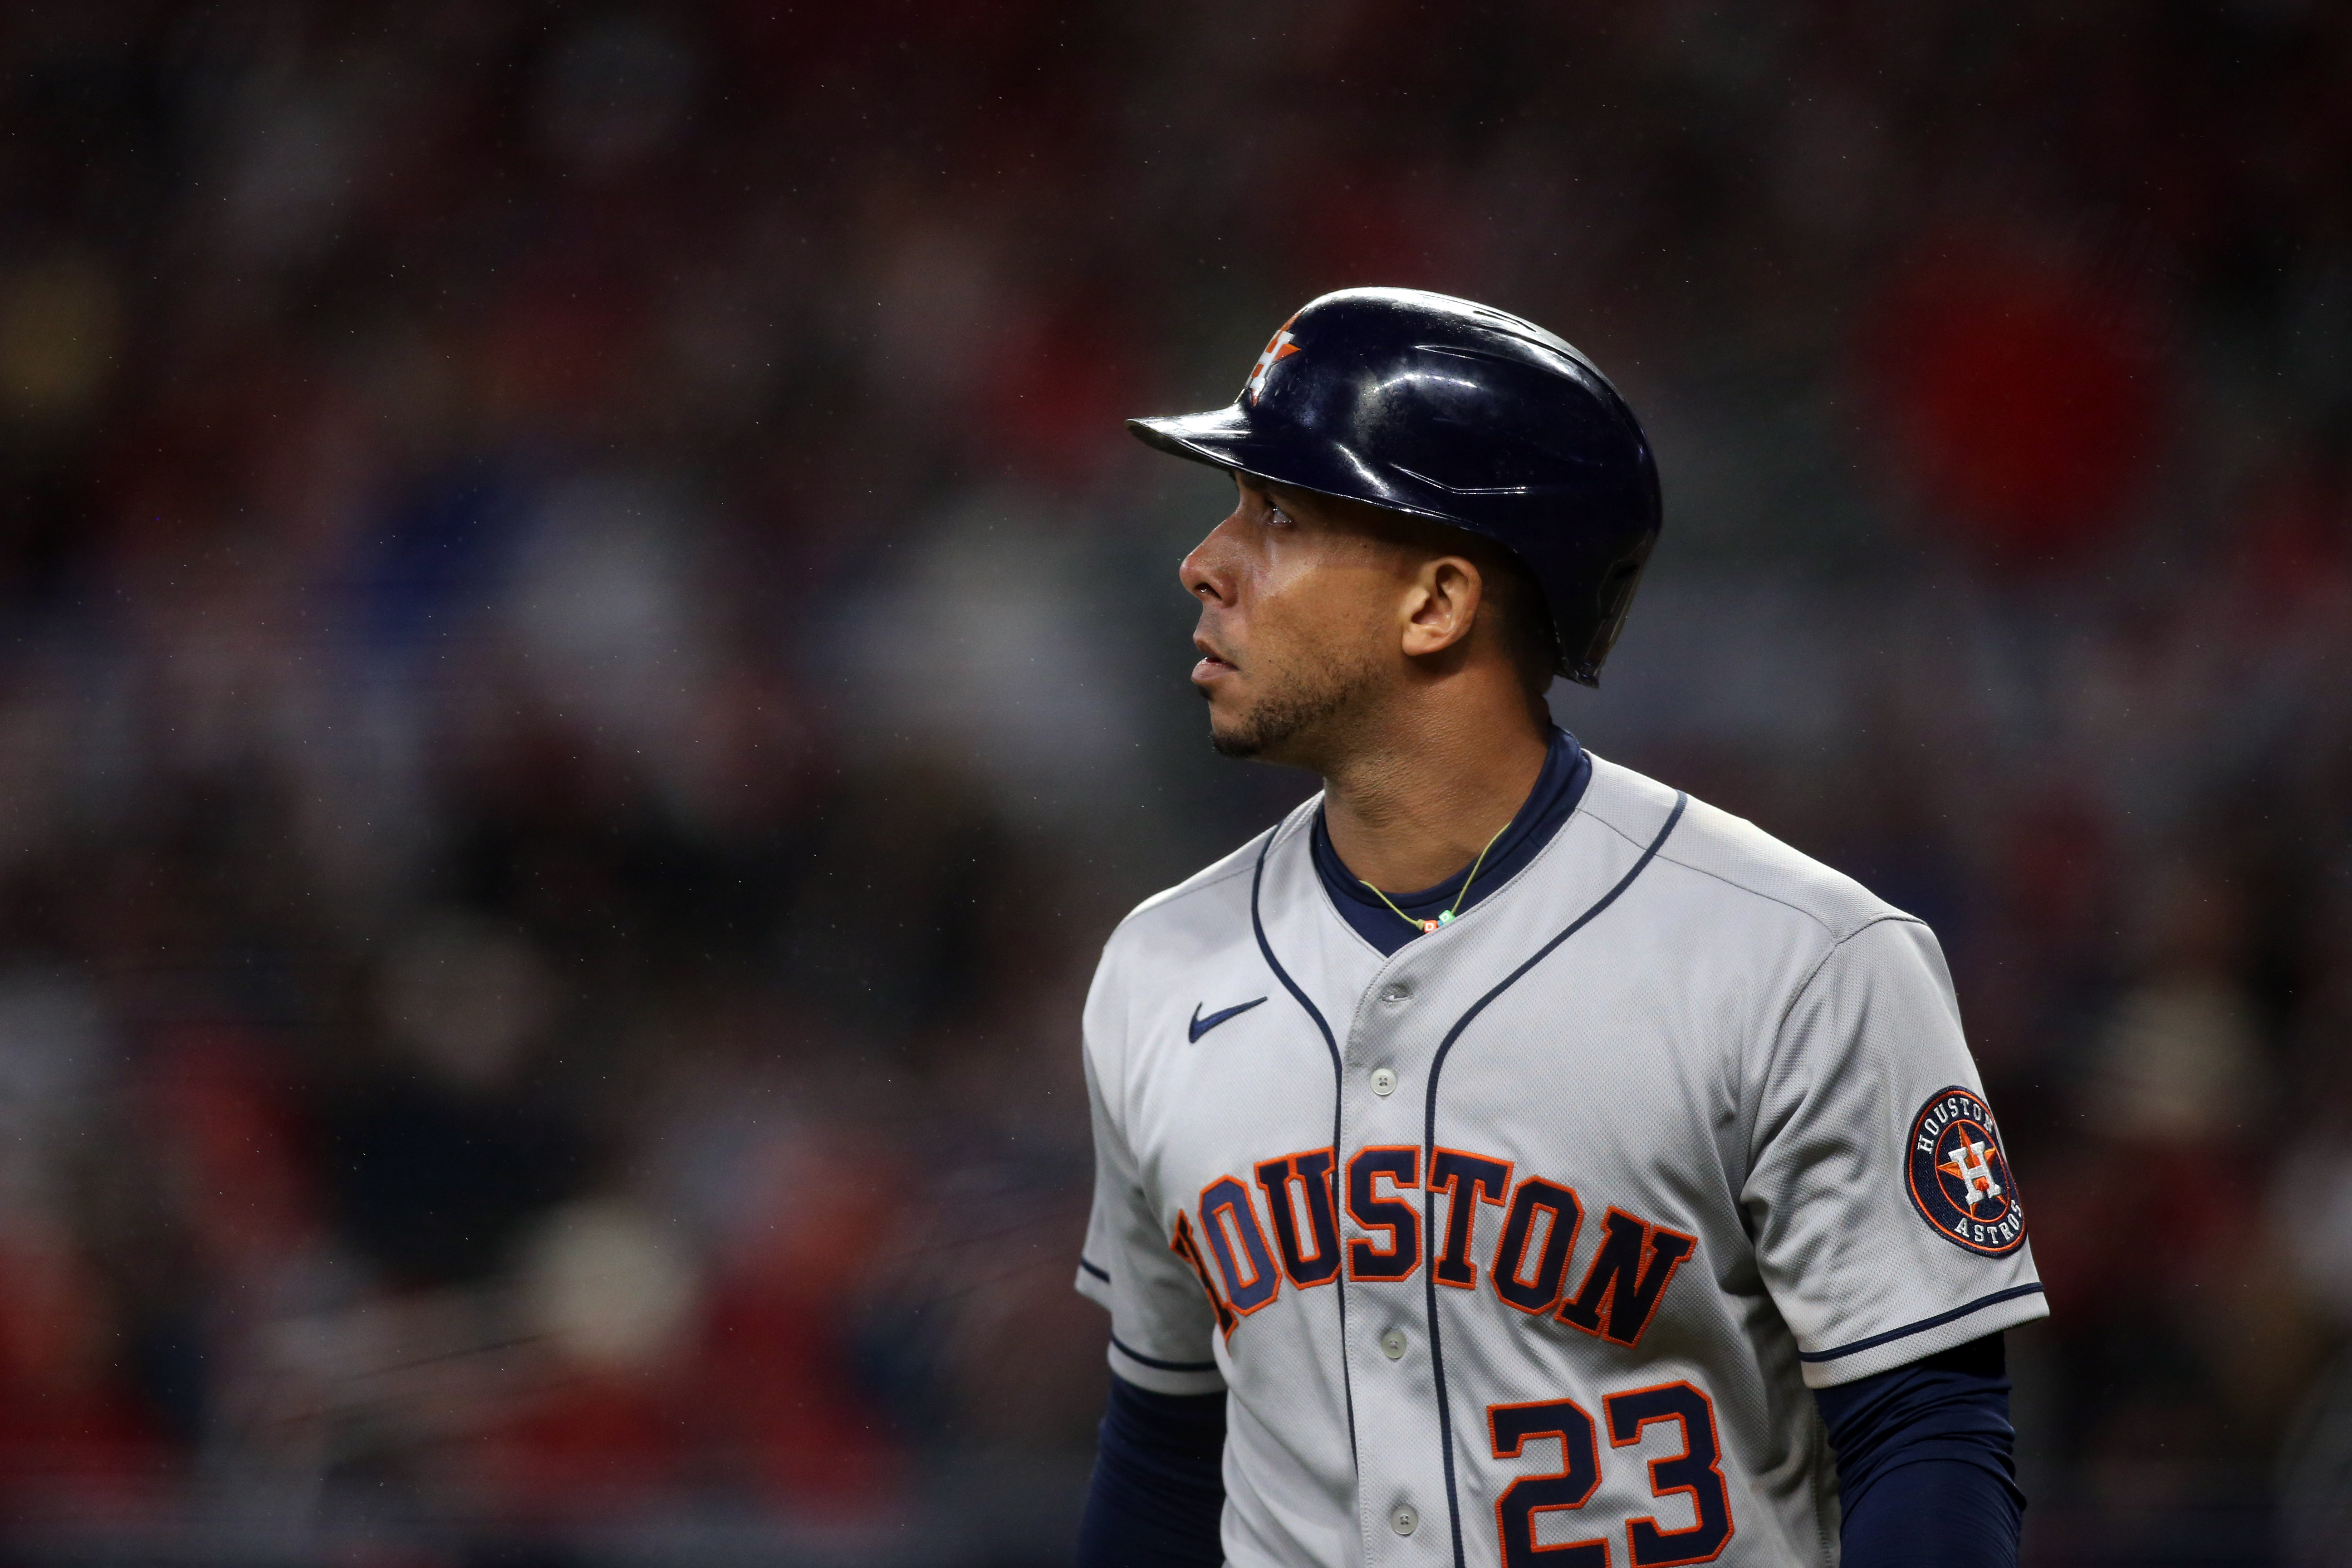 Houston Astros left fielder Michael Brantley (23) reacts after striking out during the fourth inning against the Atlanta Braves during game three of the 2021 World Series at Truist Park.